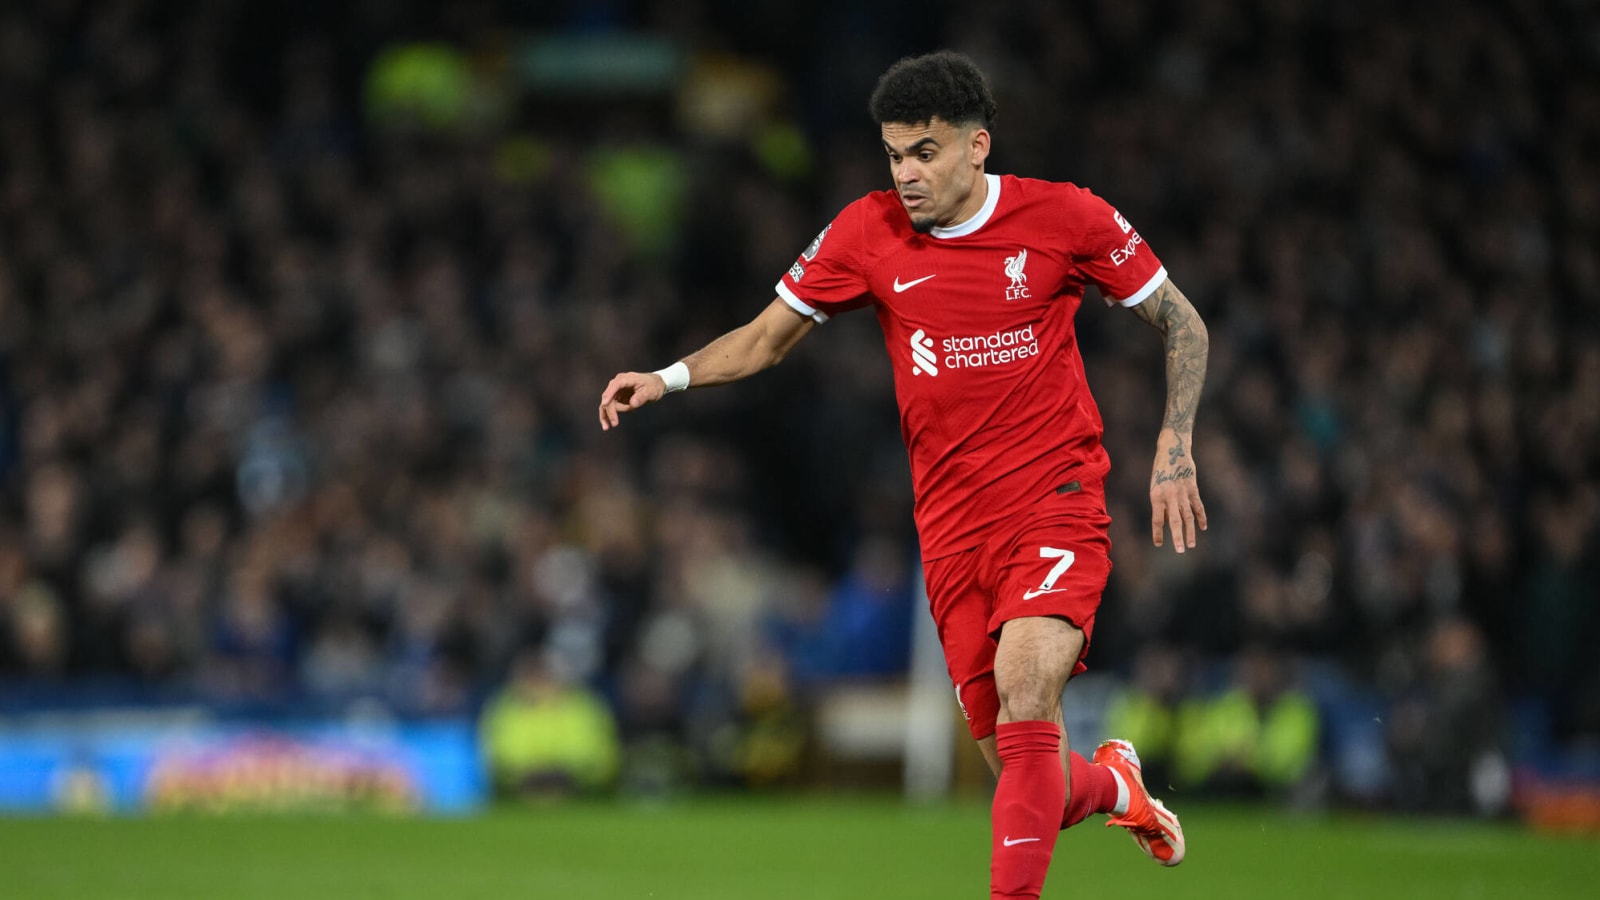 David Ornstein has noticed something ‘quite unusual’ about Liverpool player who’s ‘done so well’